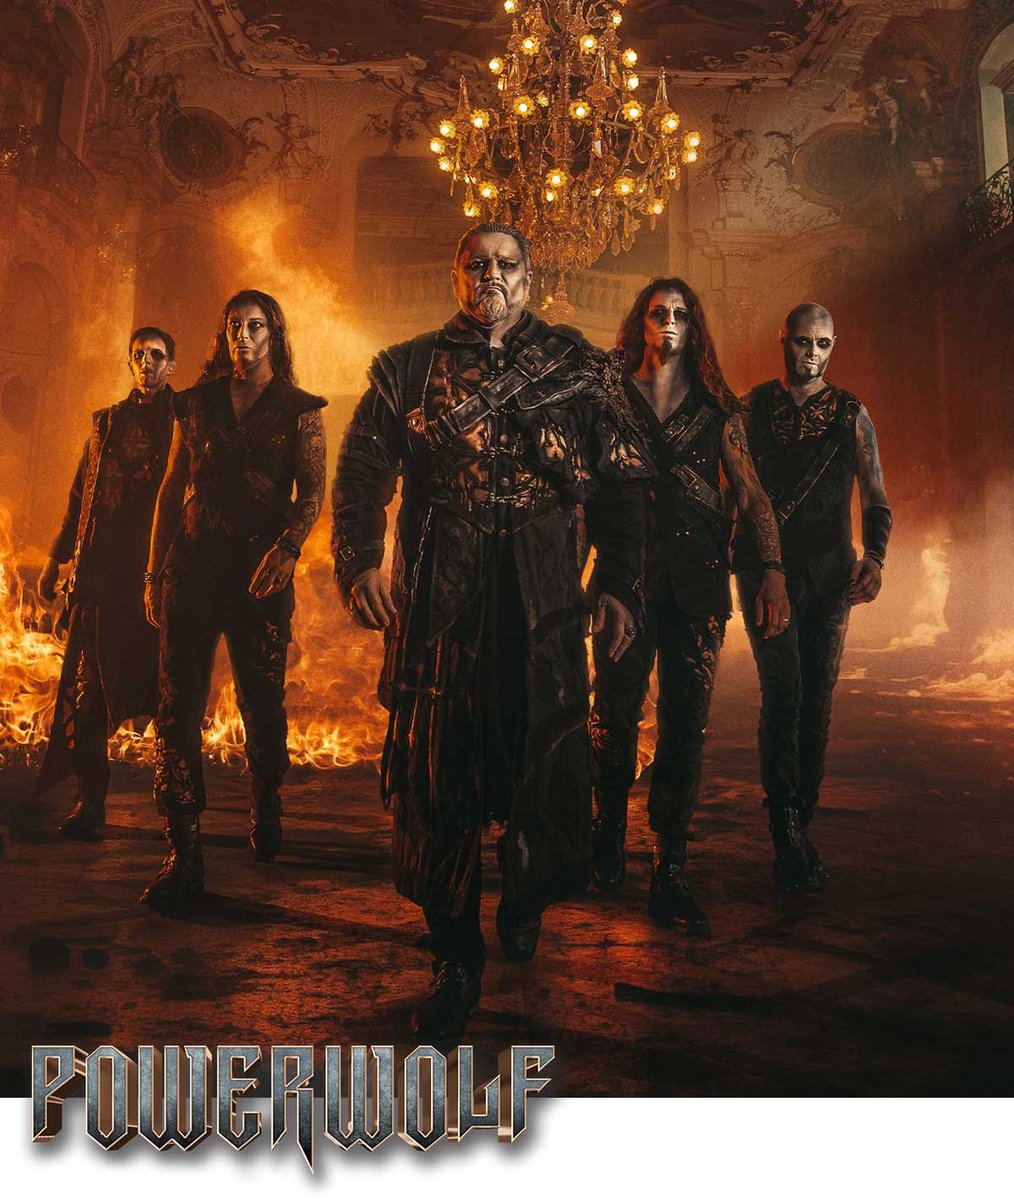 'Wake Up The Wicked' is the highly anticipated new studio album by power-metal stalwarts @PowerwolfBand, and you can pre-order your copy today Read the full story ➡️ tinyurl.com/24kgdhbn